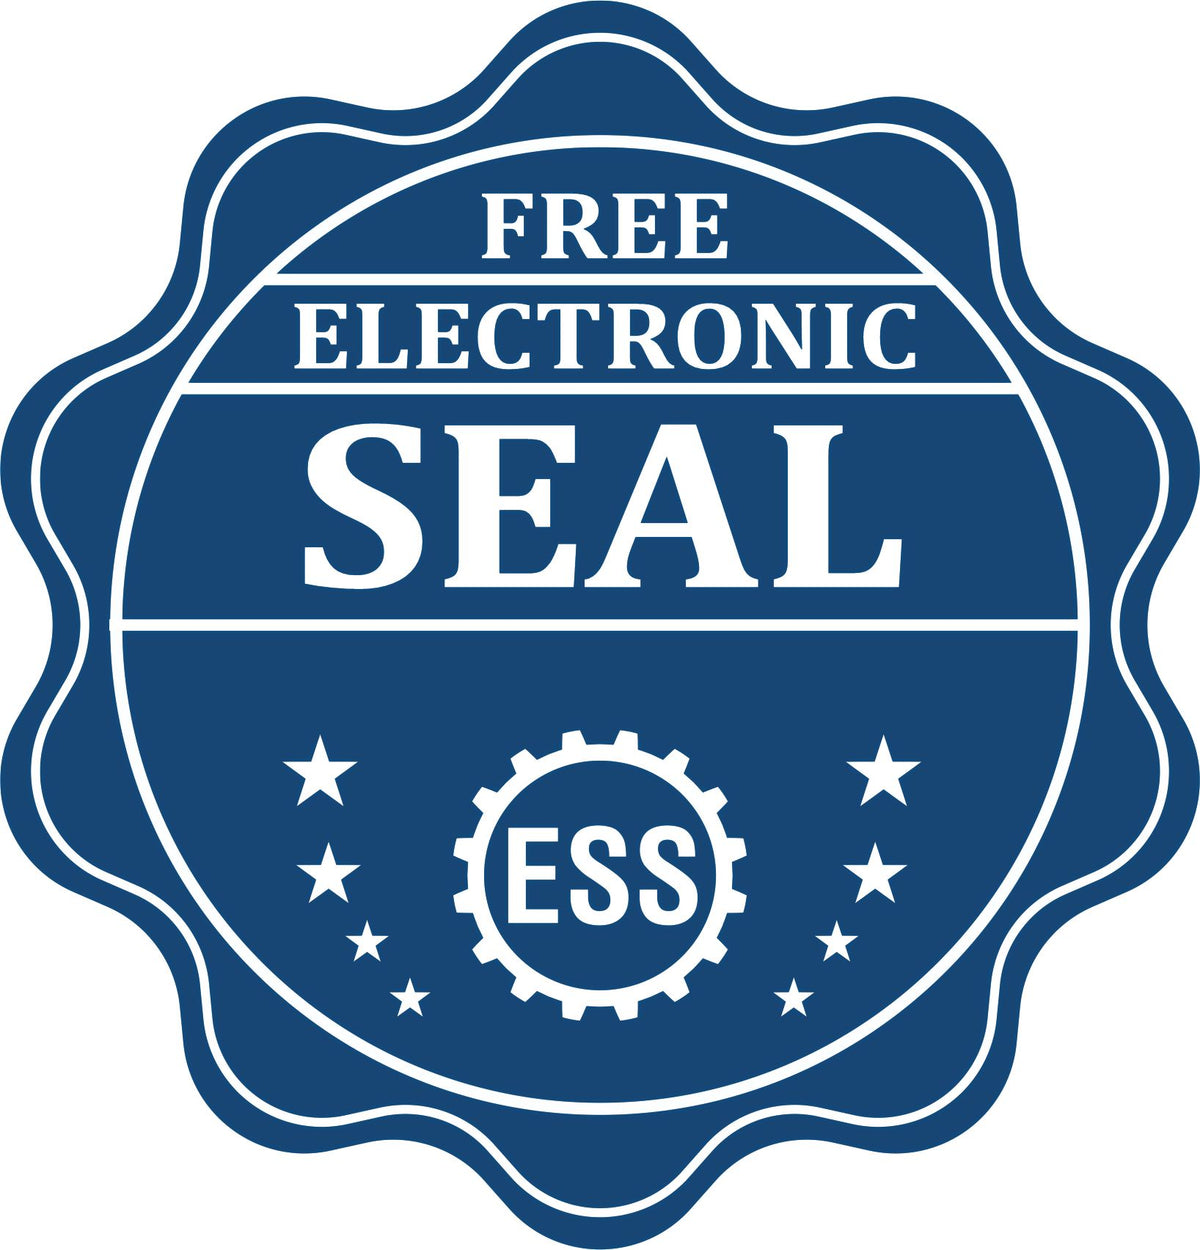 A badge showing a free electronic seal for the Soft Pocket Missouri Landscape Architect Embosser with stars and the ESS gear on the emblem.